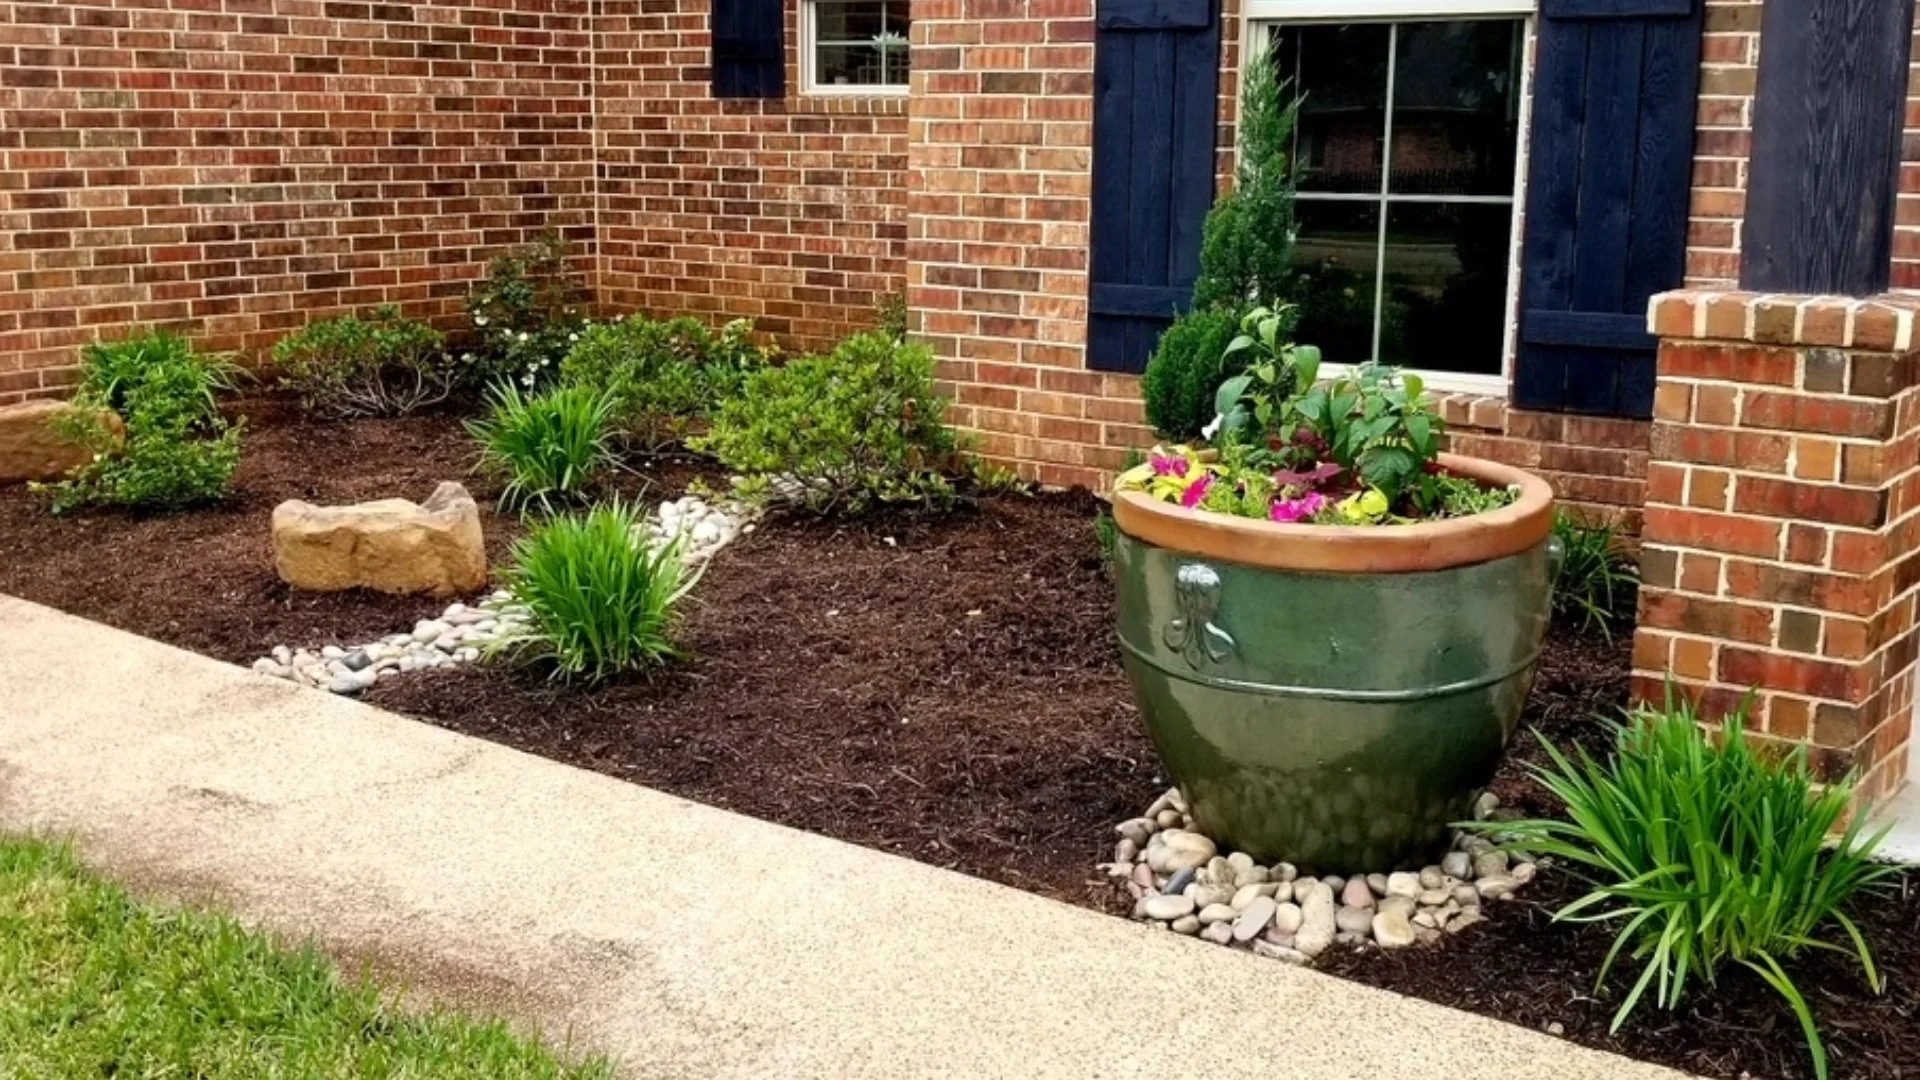 Do You Need to Replenish the Mulch in Your Landscape Beds?